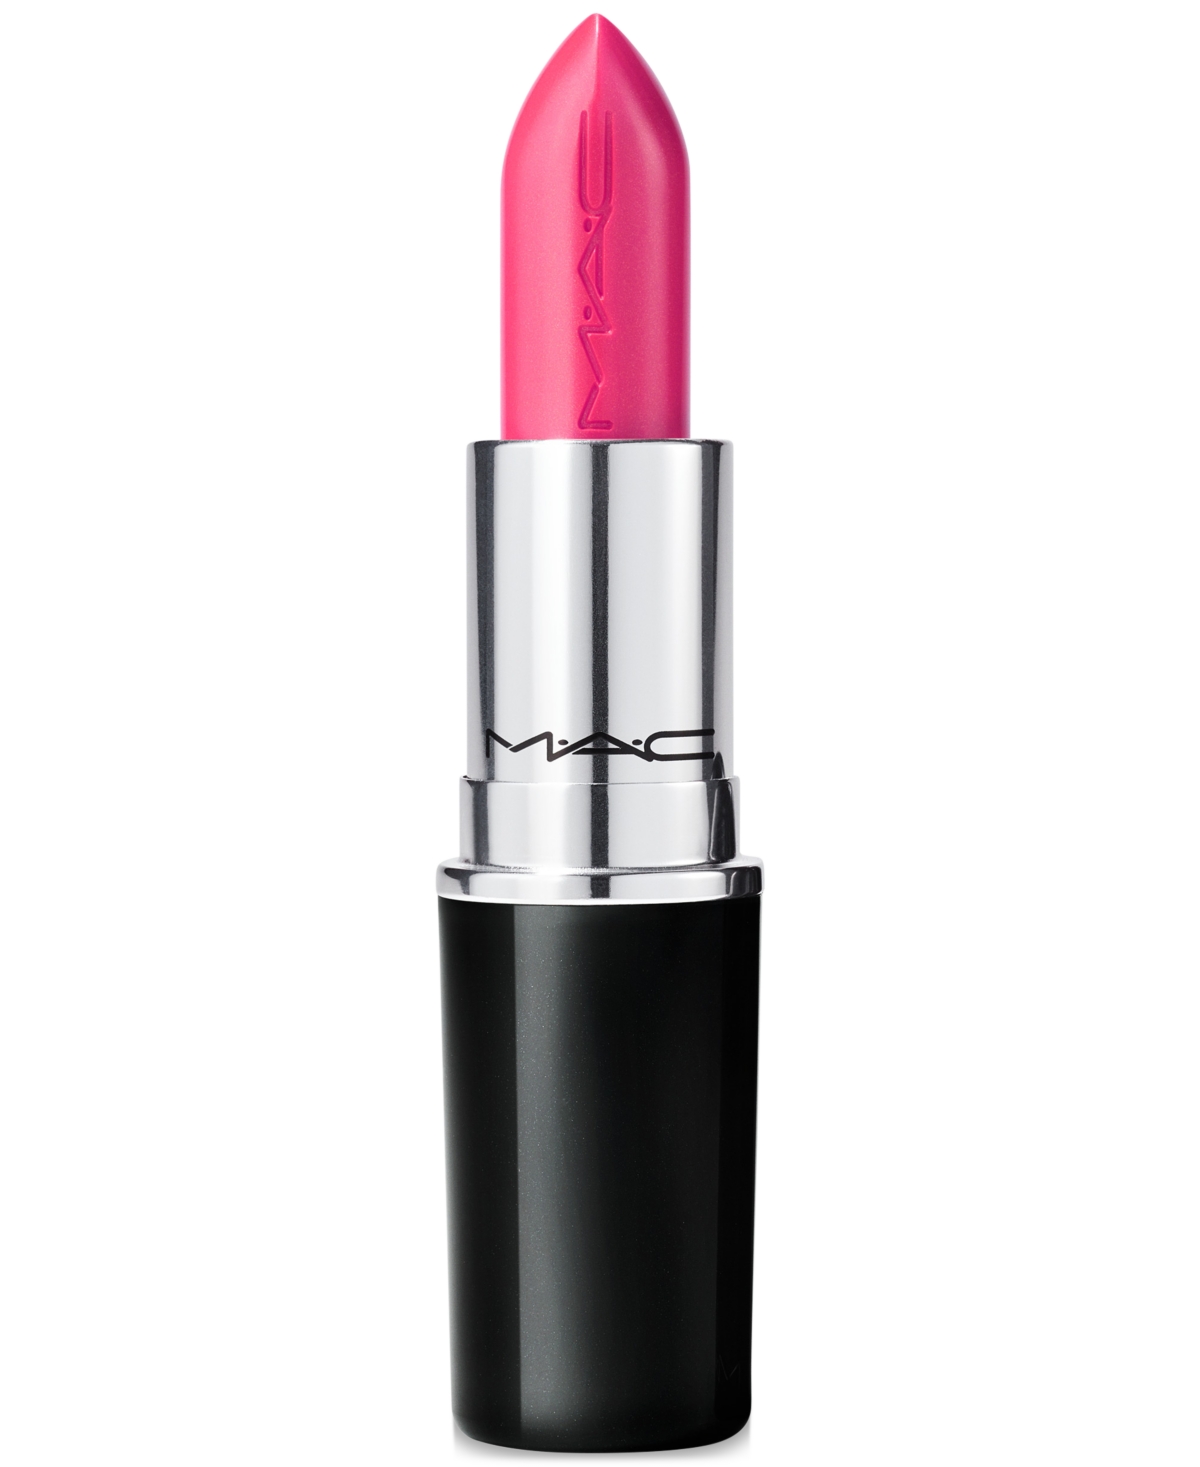 Mac Re-think Pink Lustreglass Lipstick In No Photos (bright Coral Pink)